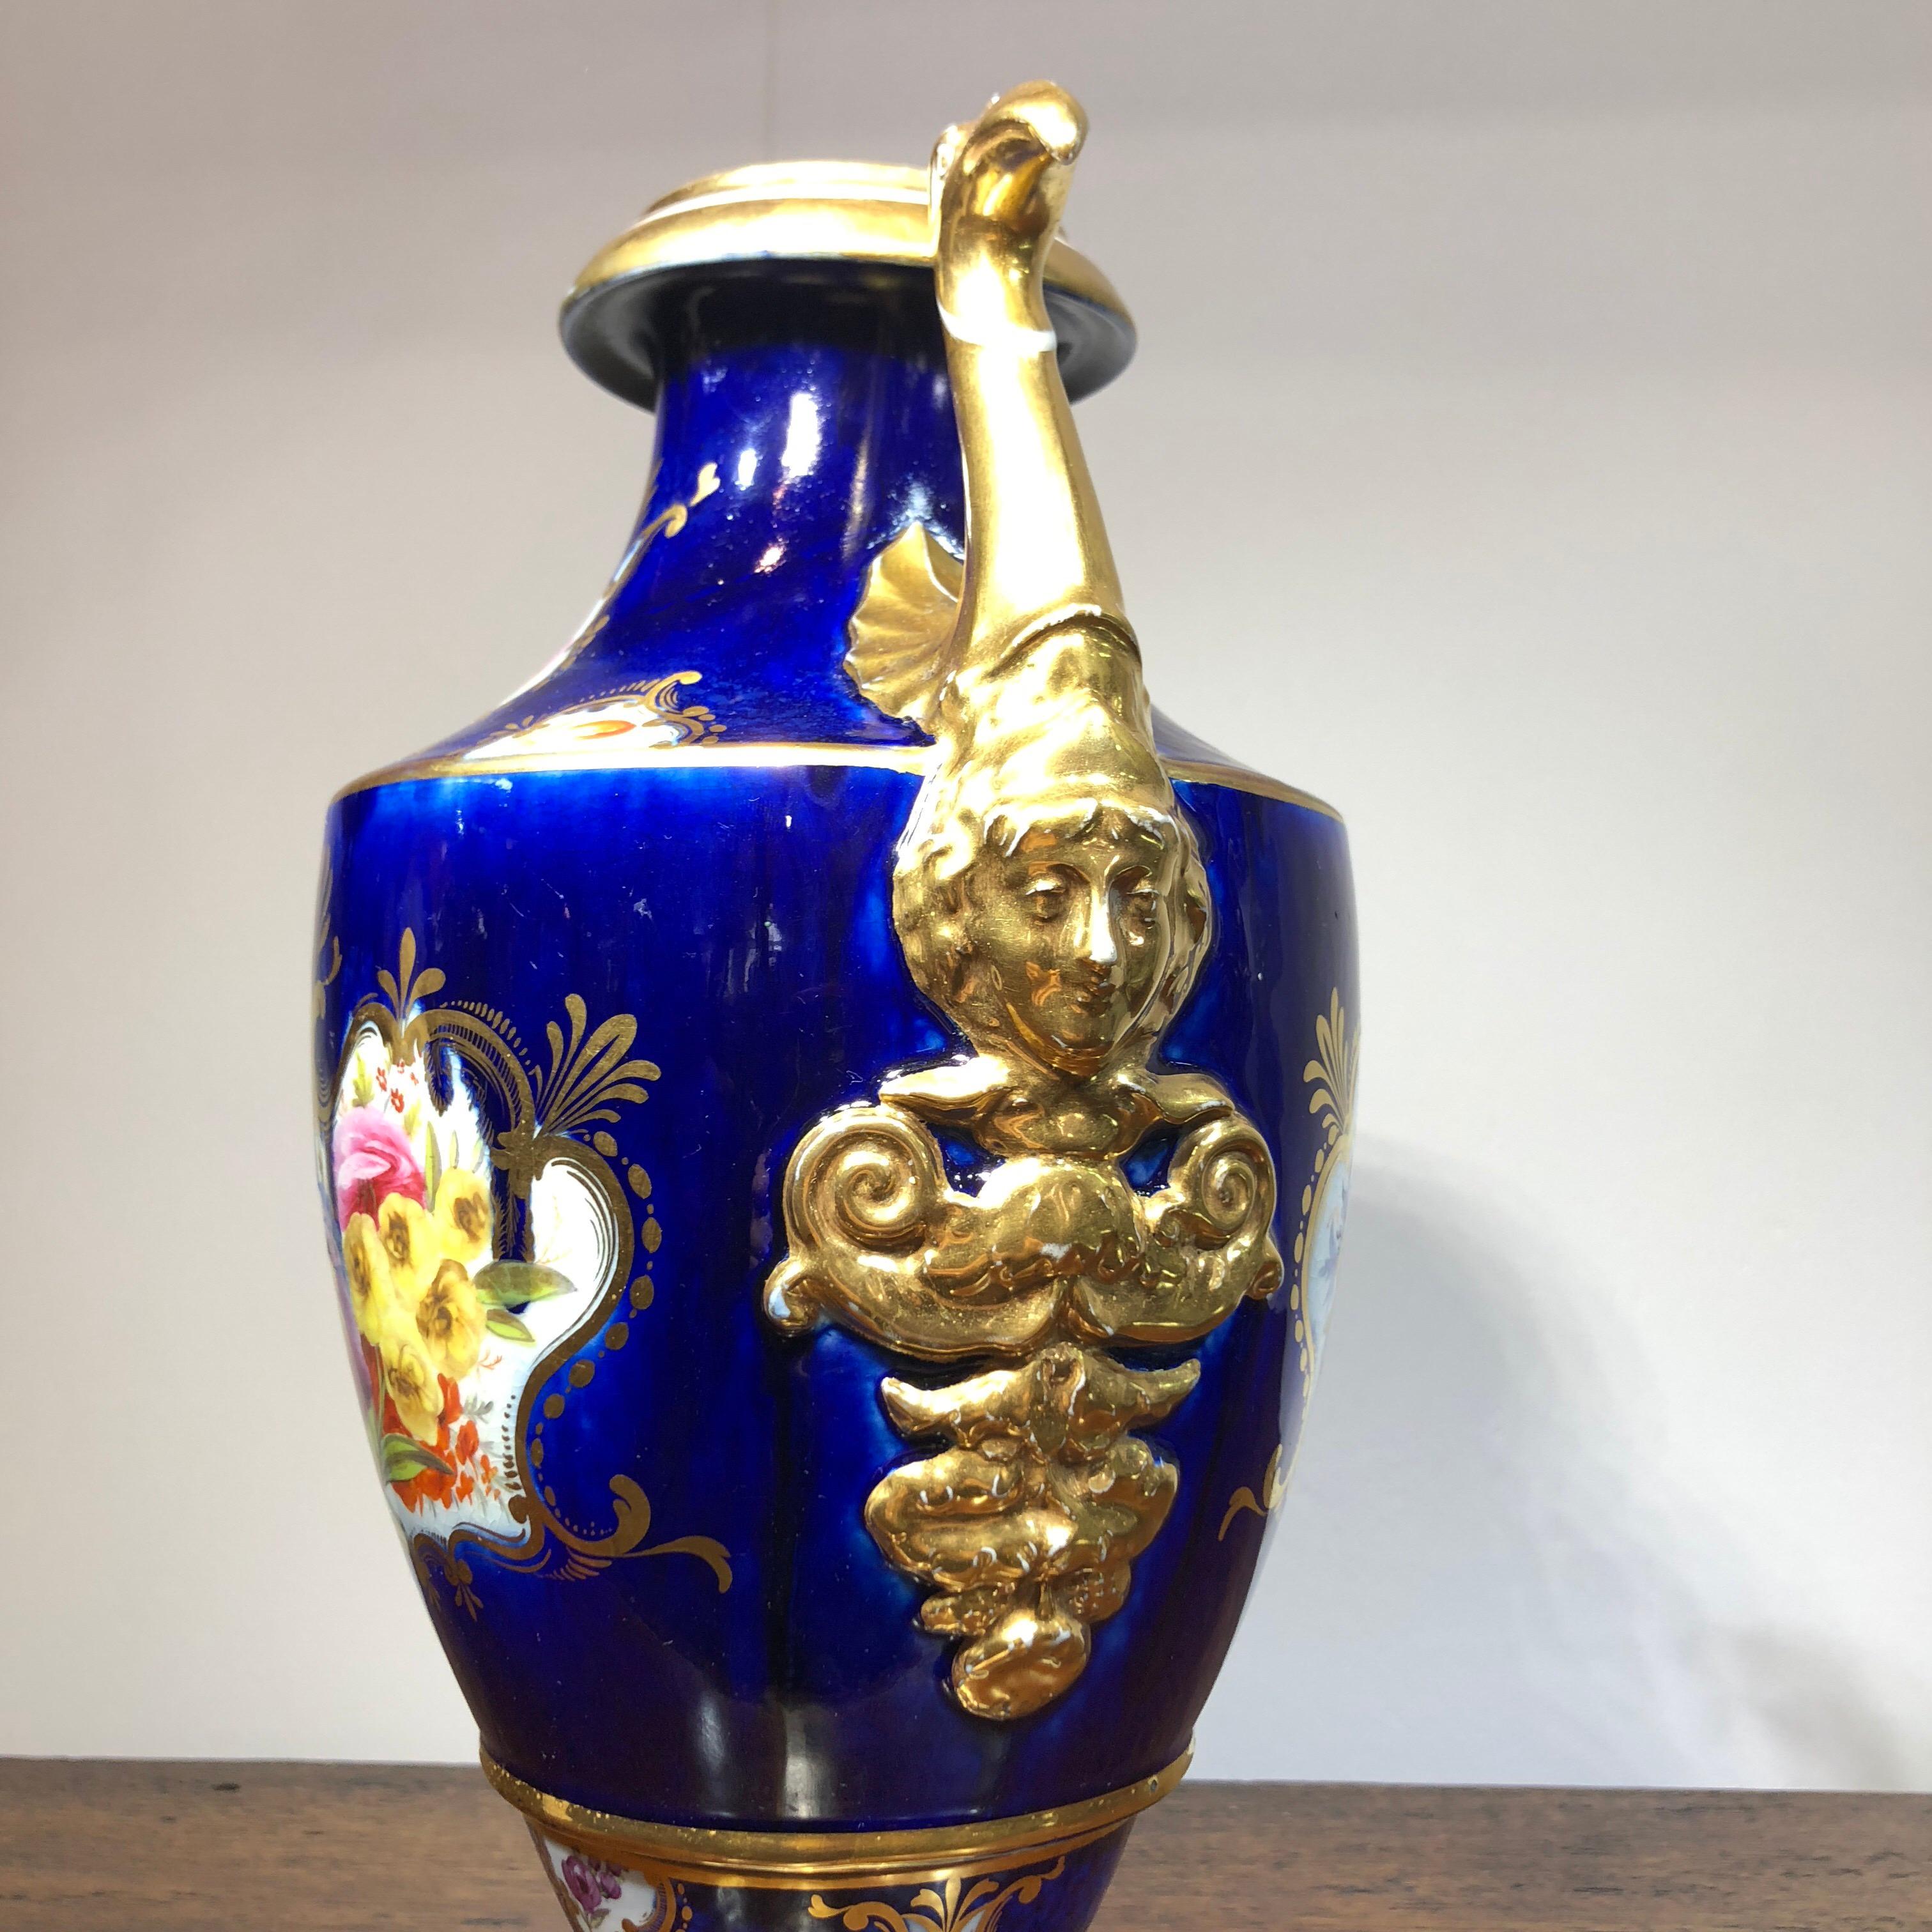 Large Coalport vase, the classic form made extraordinary by large birds head handles rising to the lip with classical mask beneath, well decorated with panels of colorful flowers on a blurred scale-blue ground.
Unmarked, circa 1805.